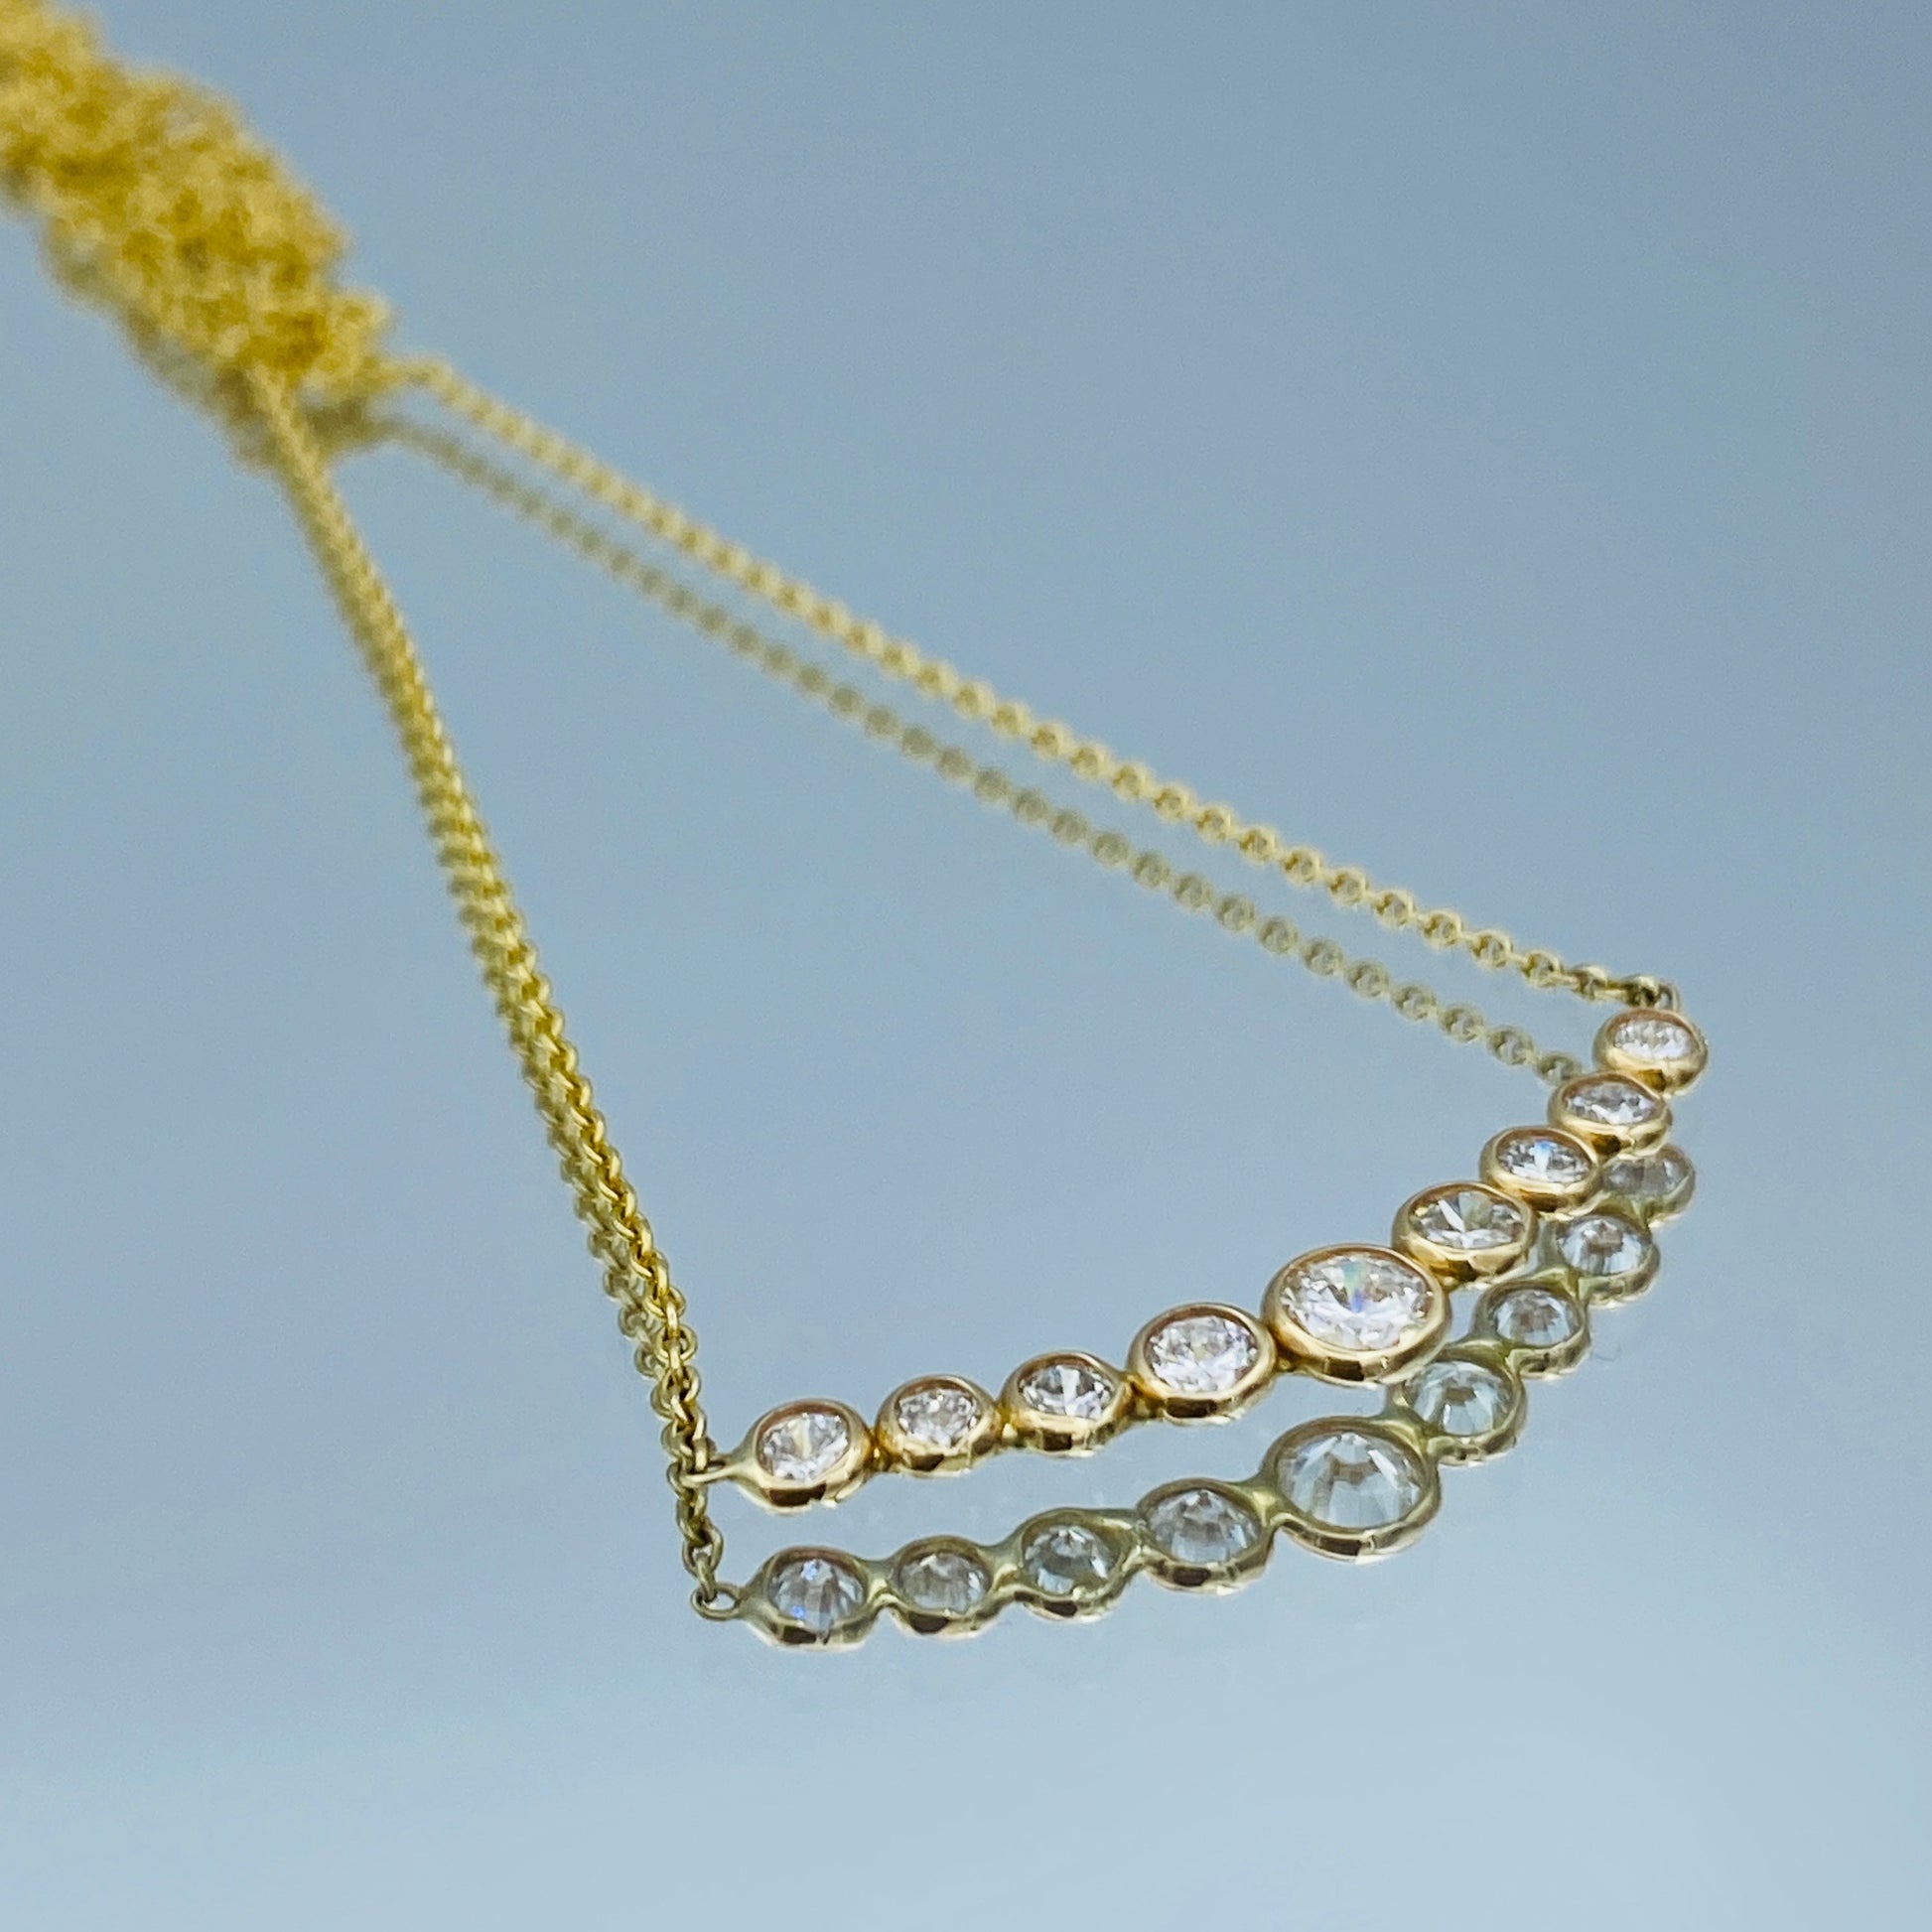 Graduated Curved Diamond Bar Necklace in 14K Yellow Gold - L and L Jewelry